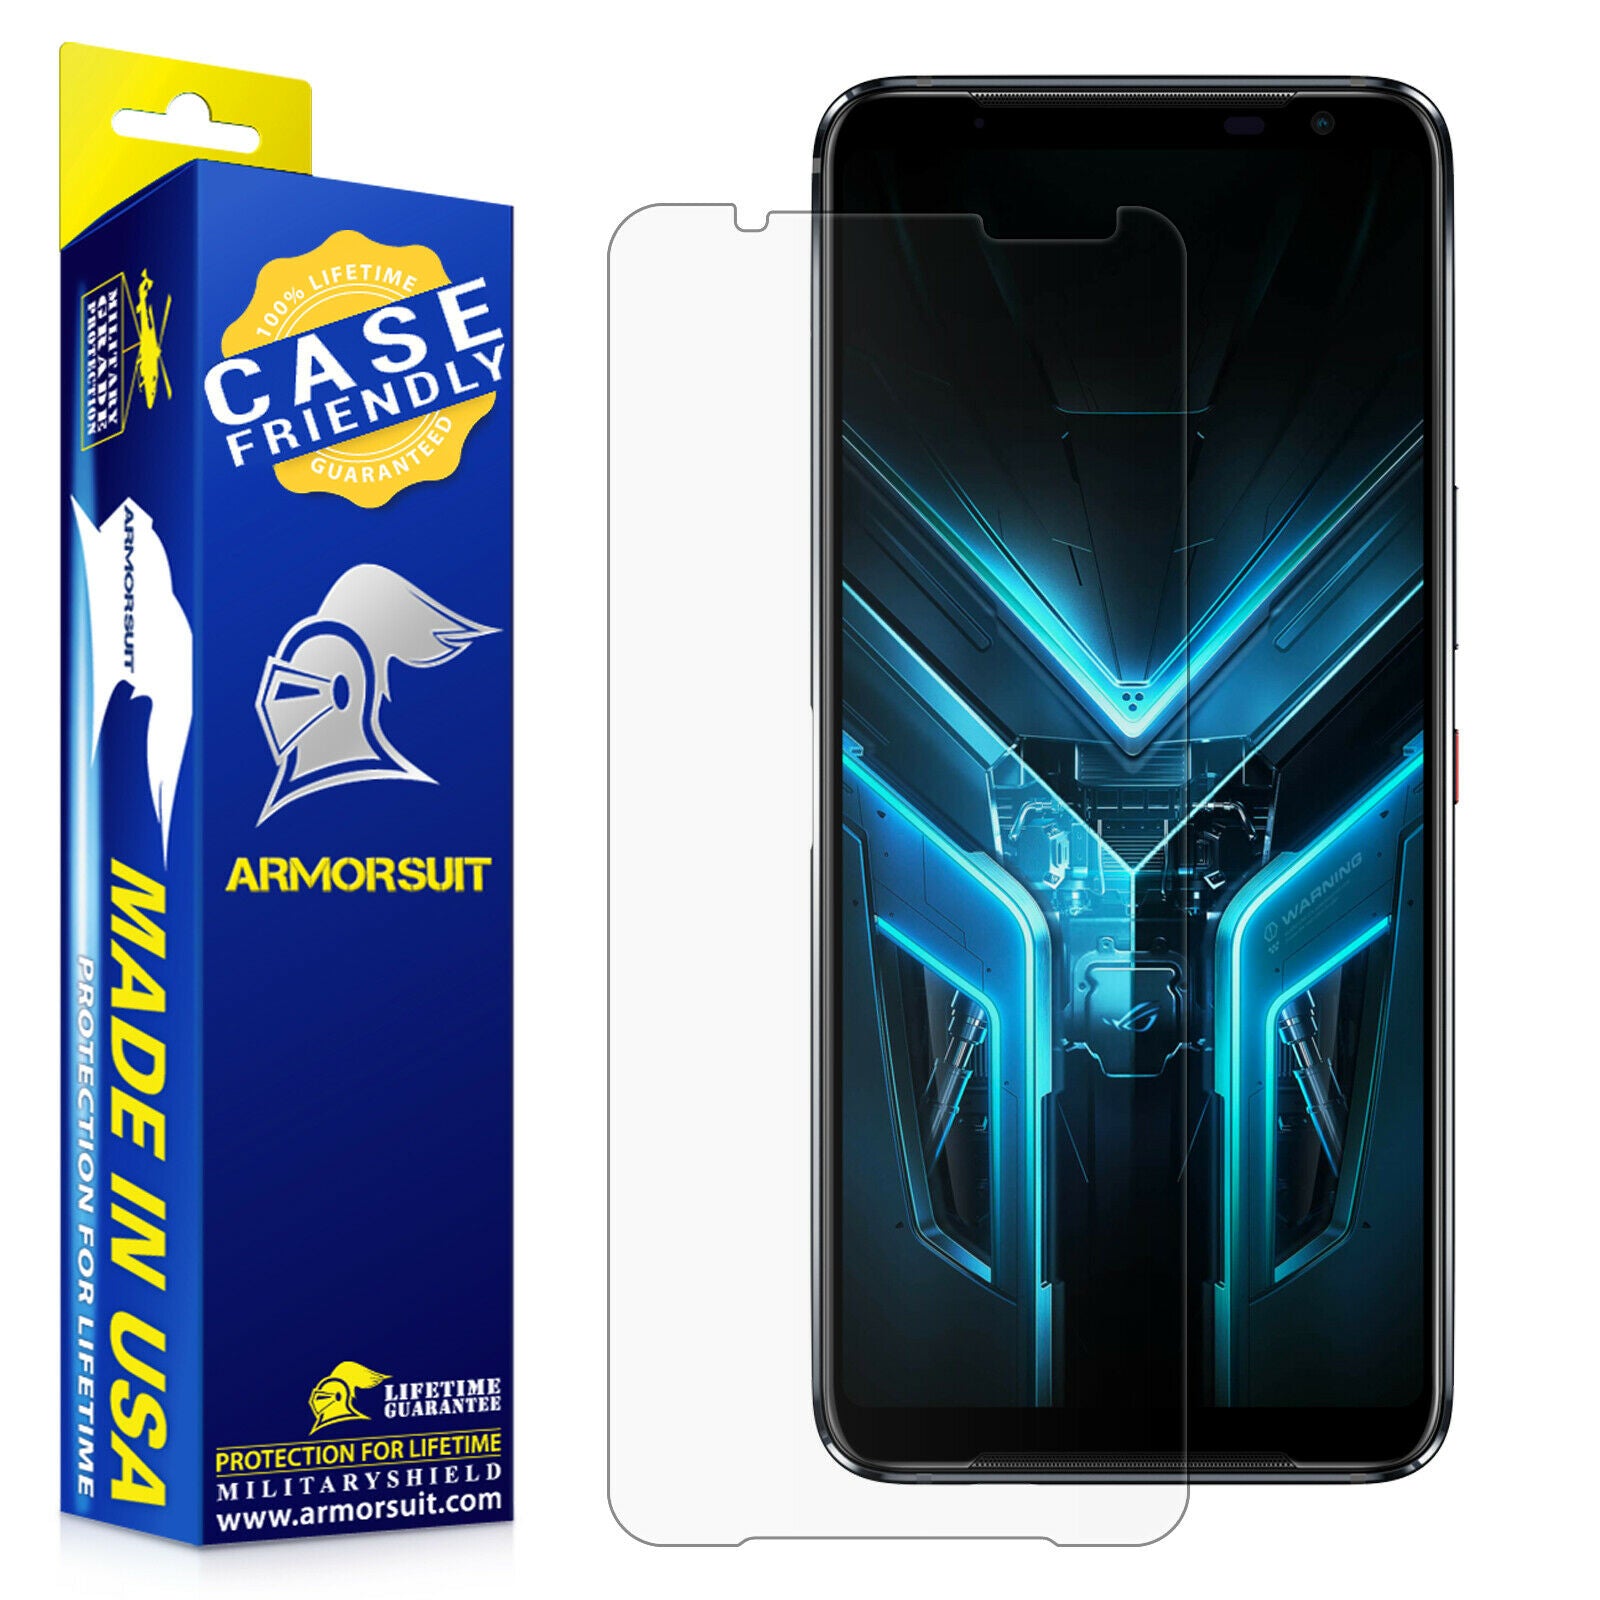 [2 Pack] Asus ROG-3 Phone Screen Protector - Case-Friendly Matte